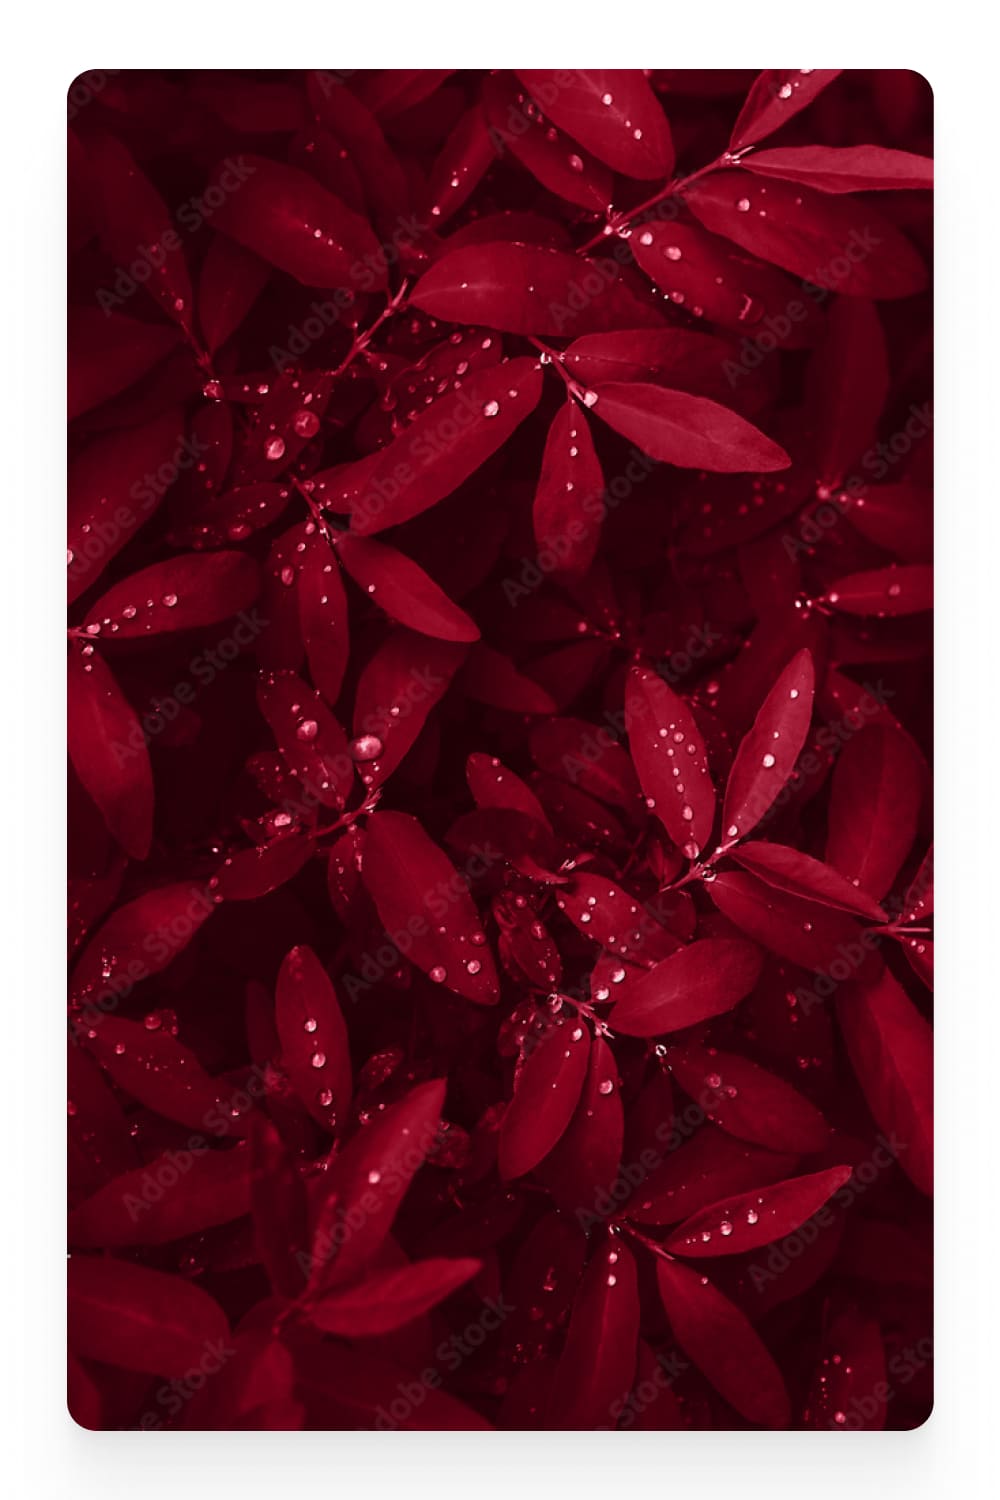 Photo of red small leaves with water drops.